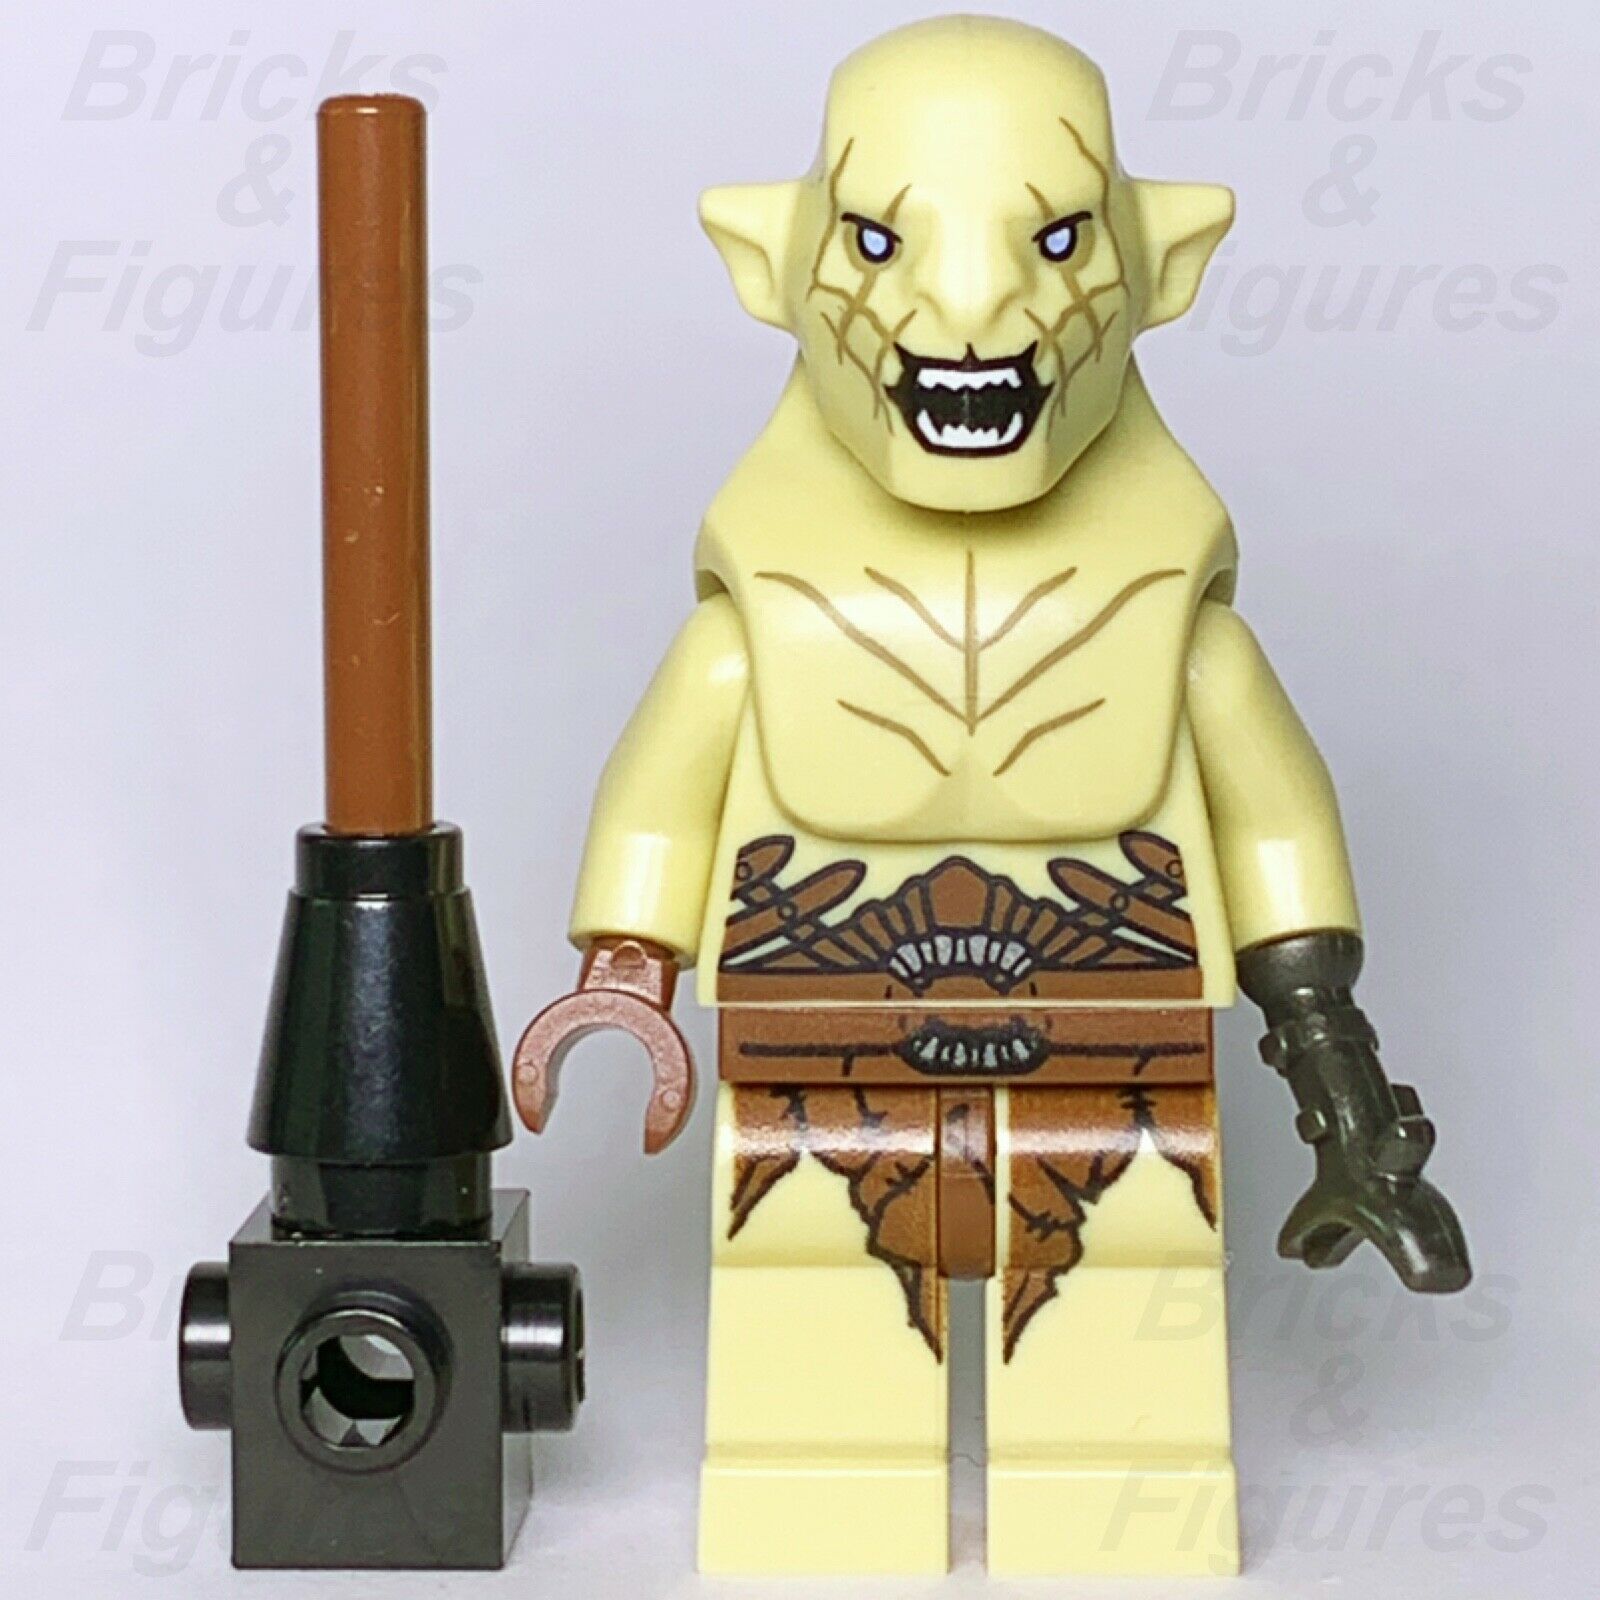 New The Hobbit Lord of the Rings LEGO Azog Orc King Defiler Minifigure 79017 - Bricks & Figures